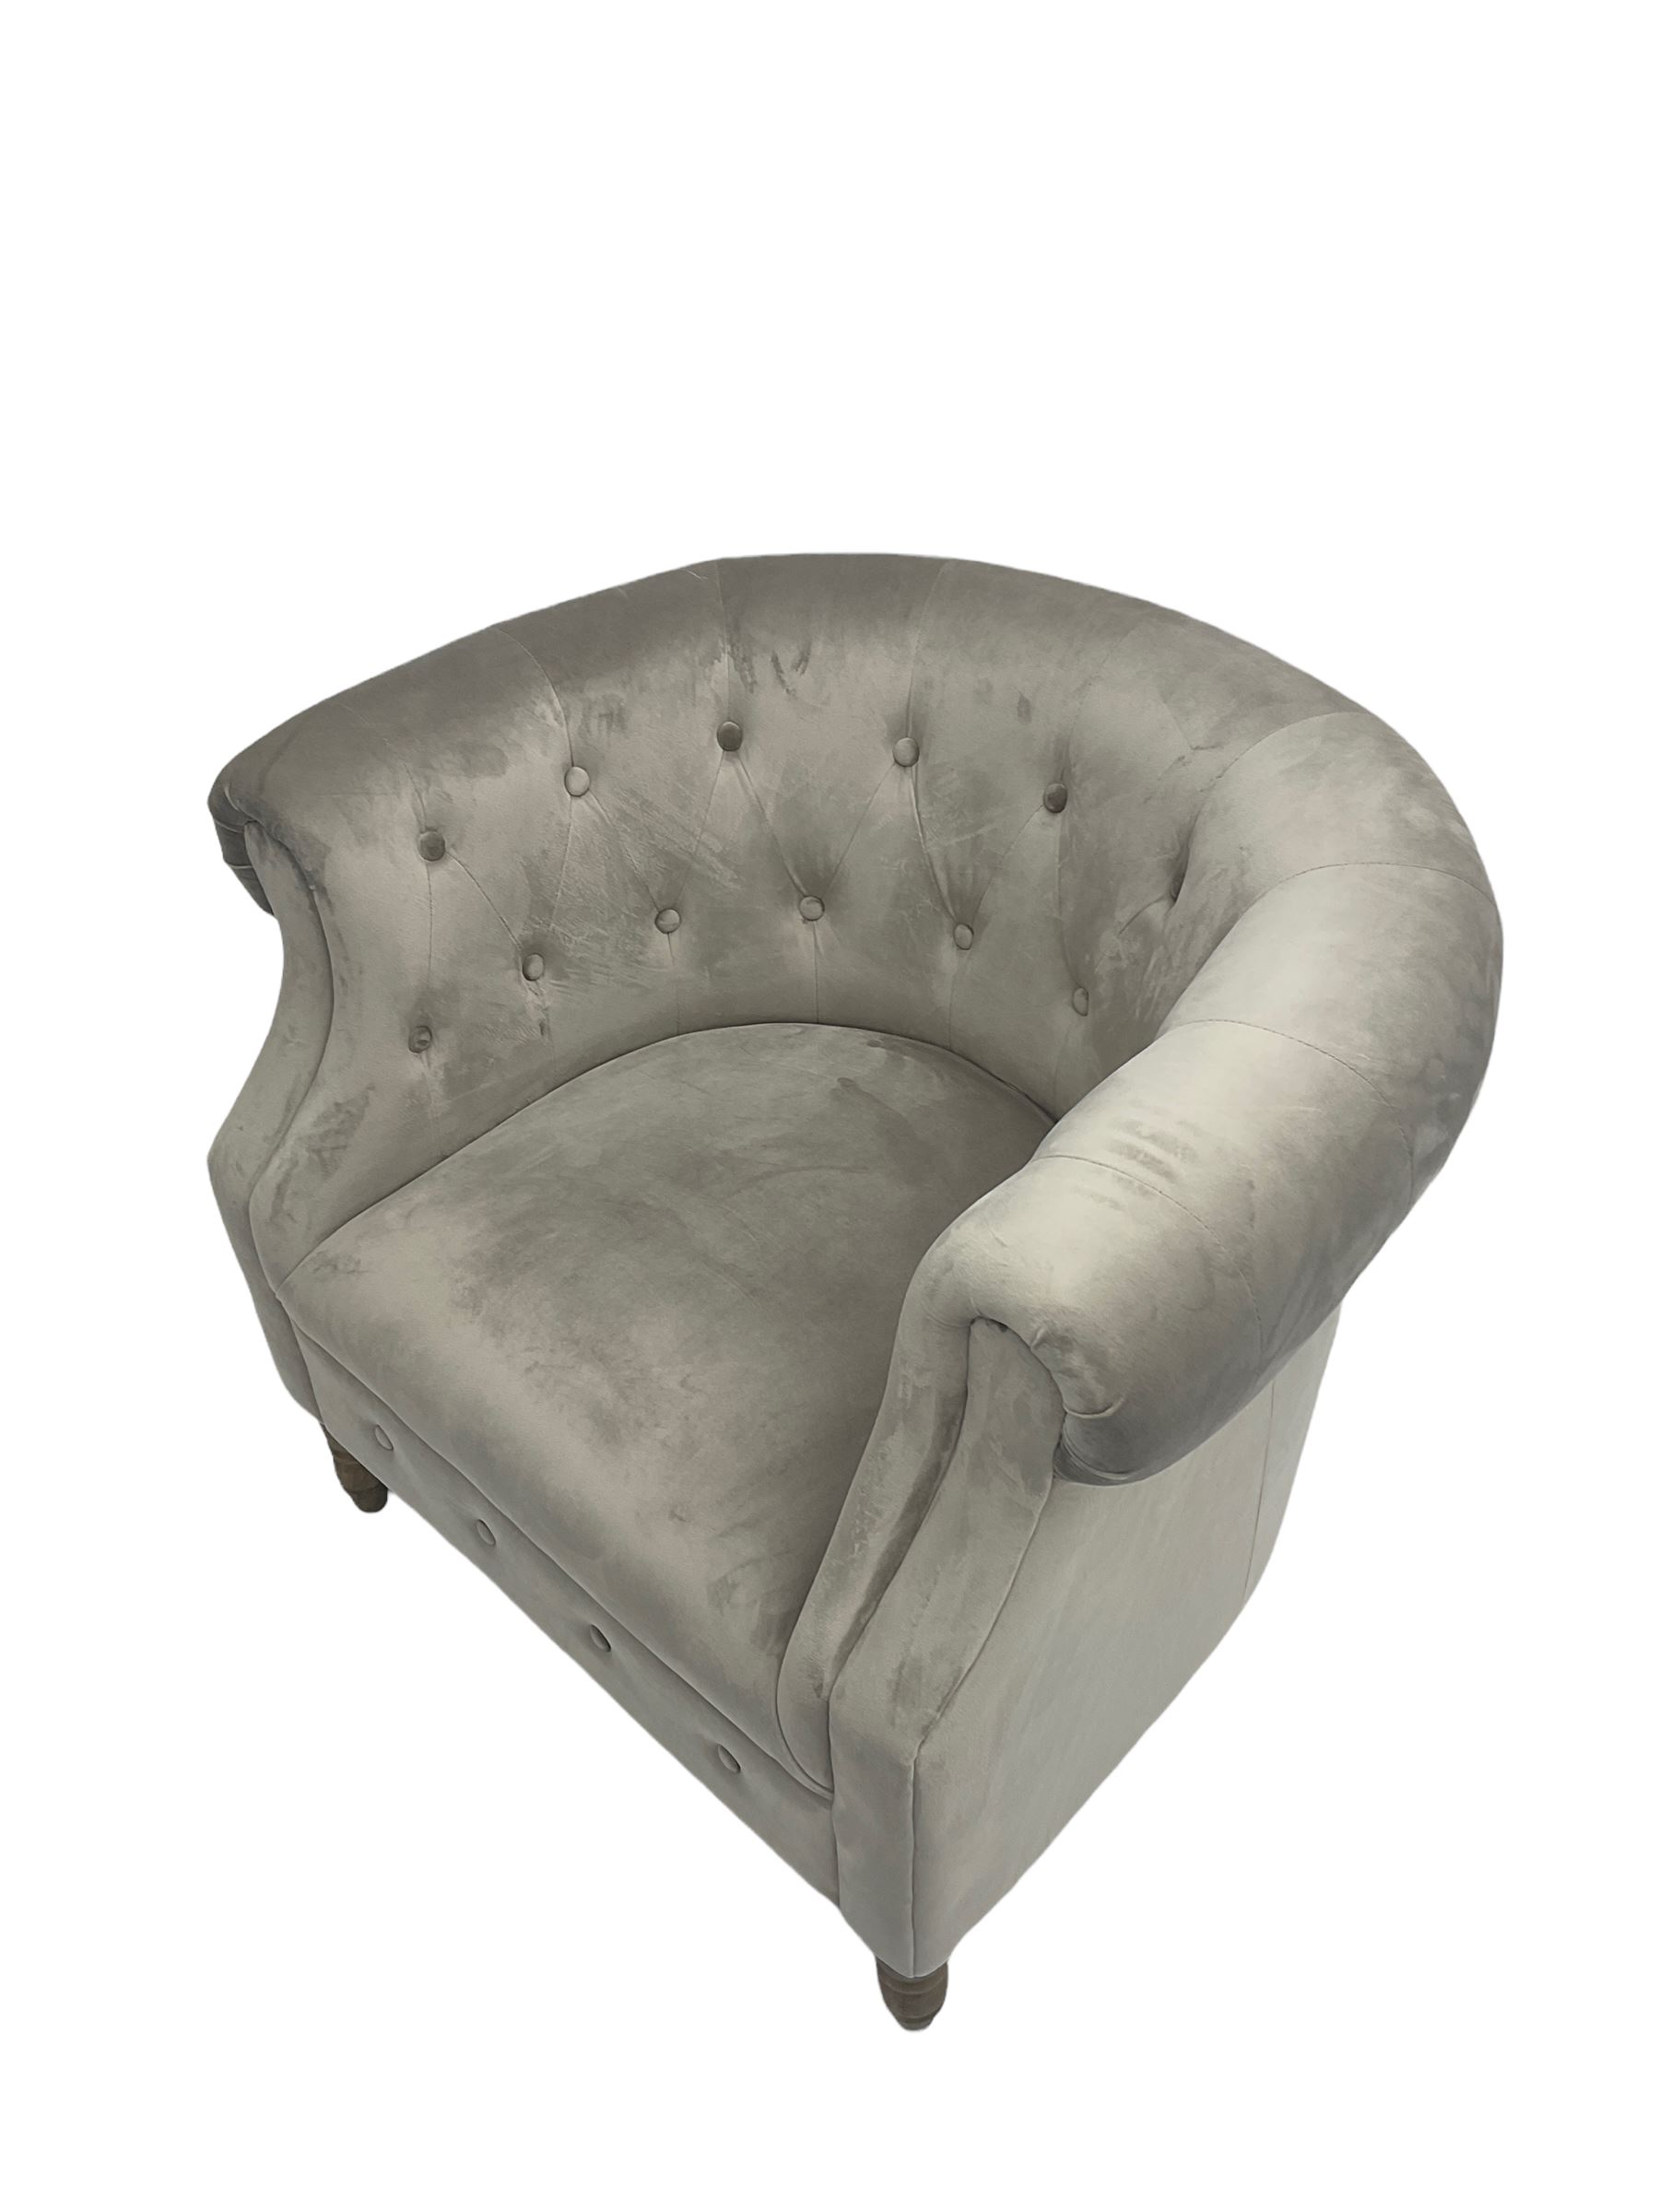 Grey velvet Chesterfield button pressed tub chair with rolled arms - Image 4 of 6